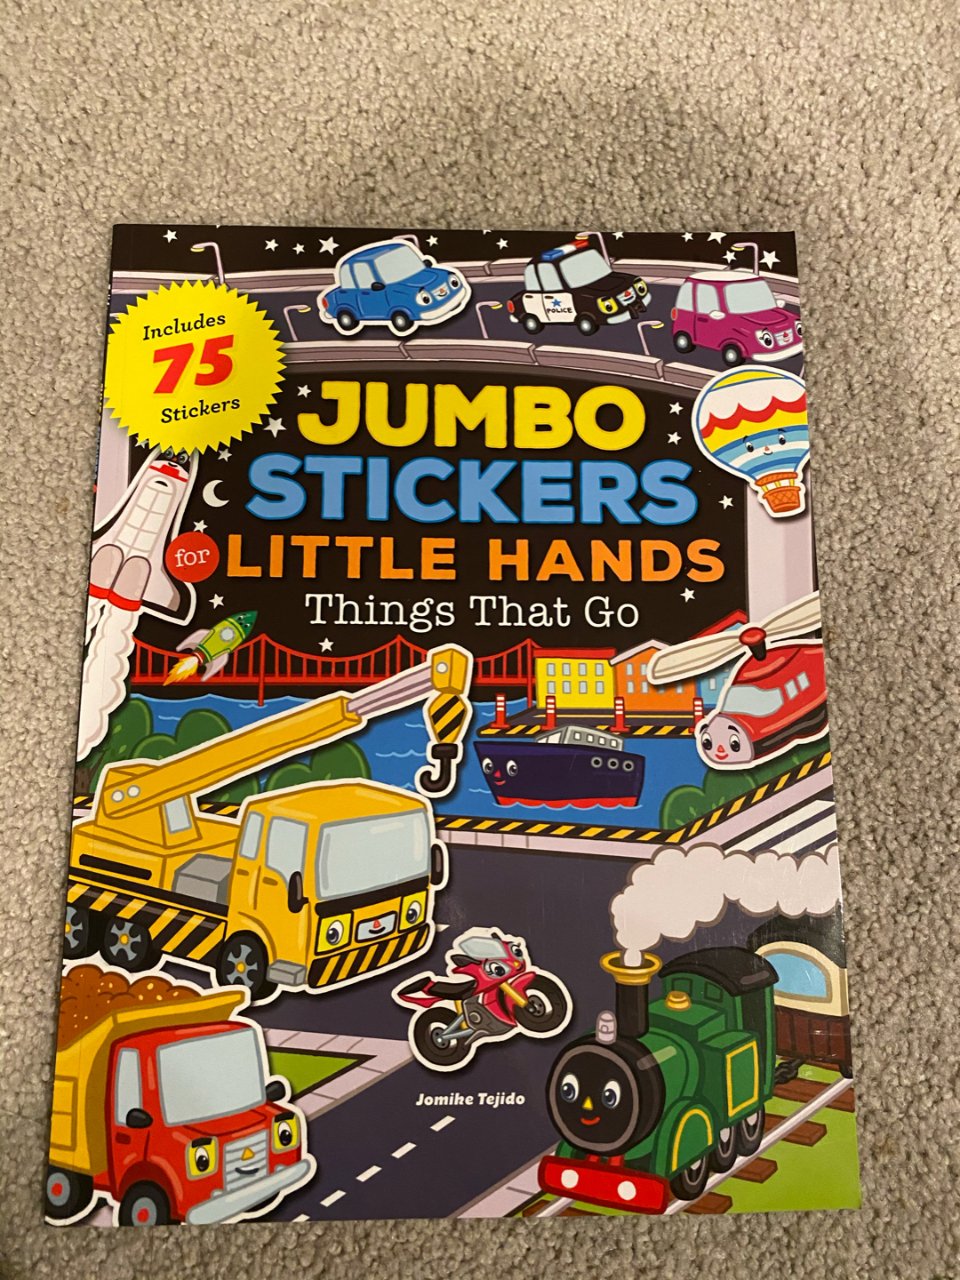 Target 塔吉特百货,带娃必备,toddler activity,Jumbo Stickers for Little Hands: Things That Go 纸质书